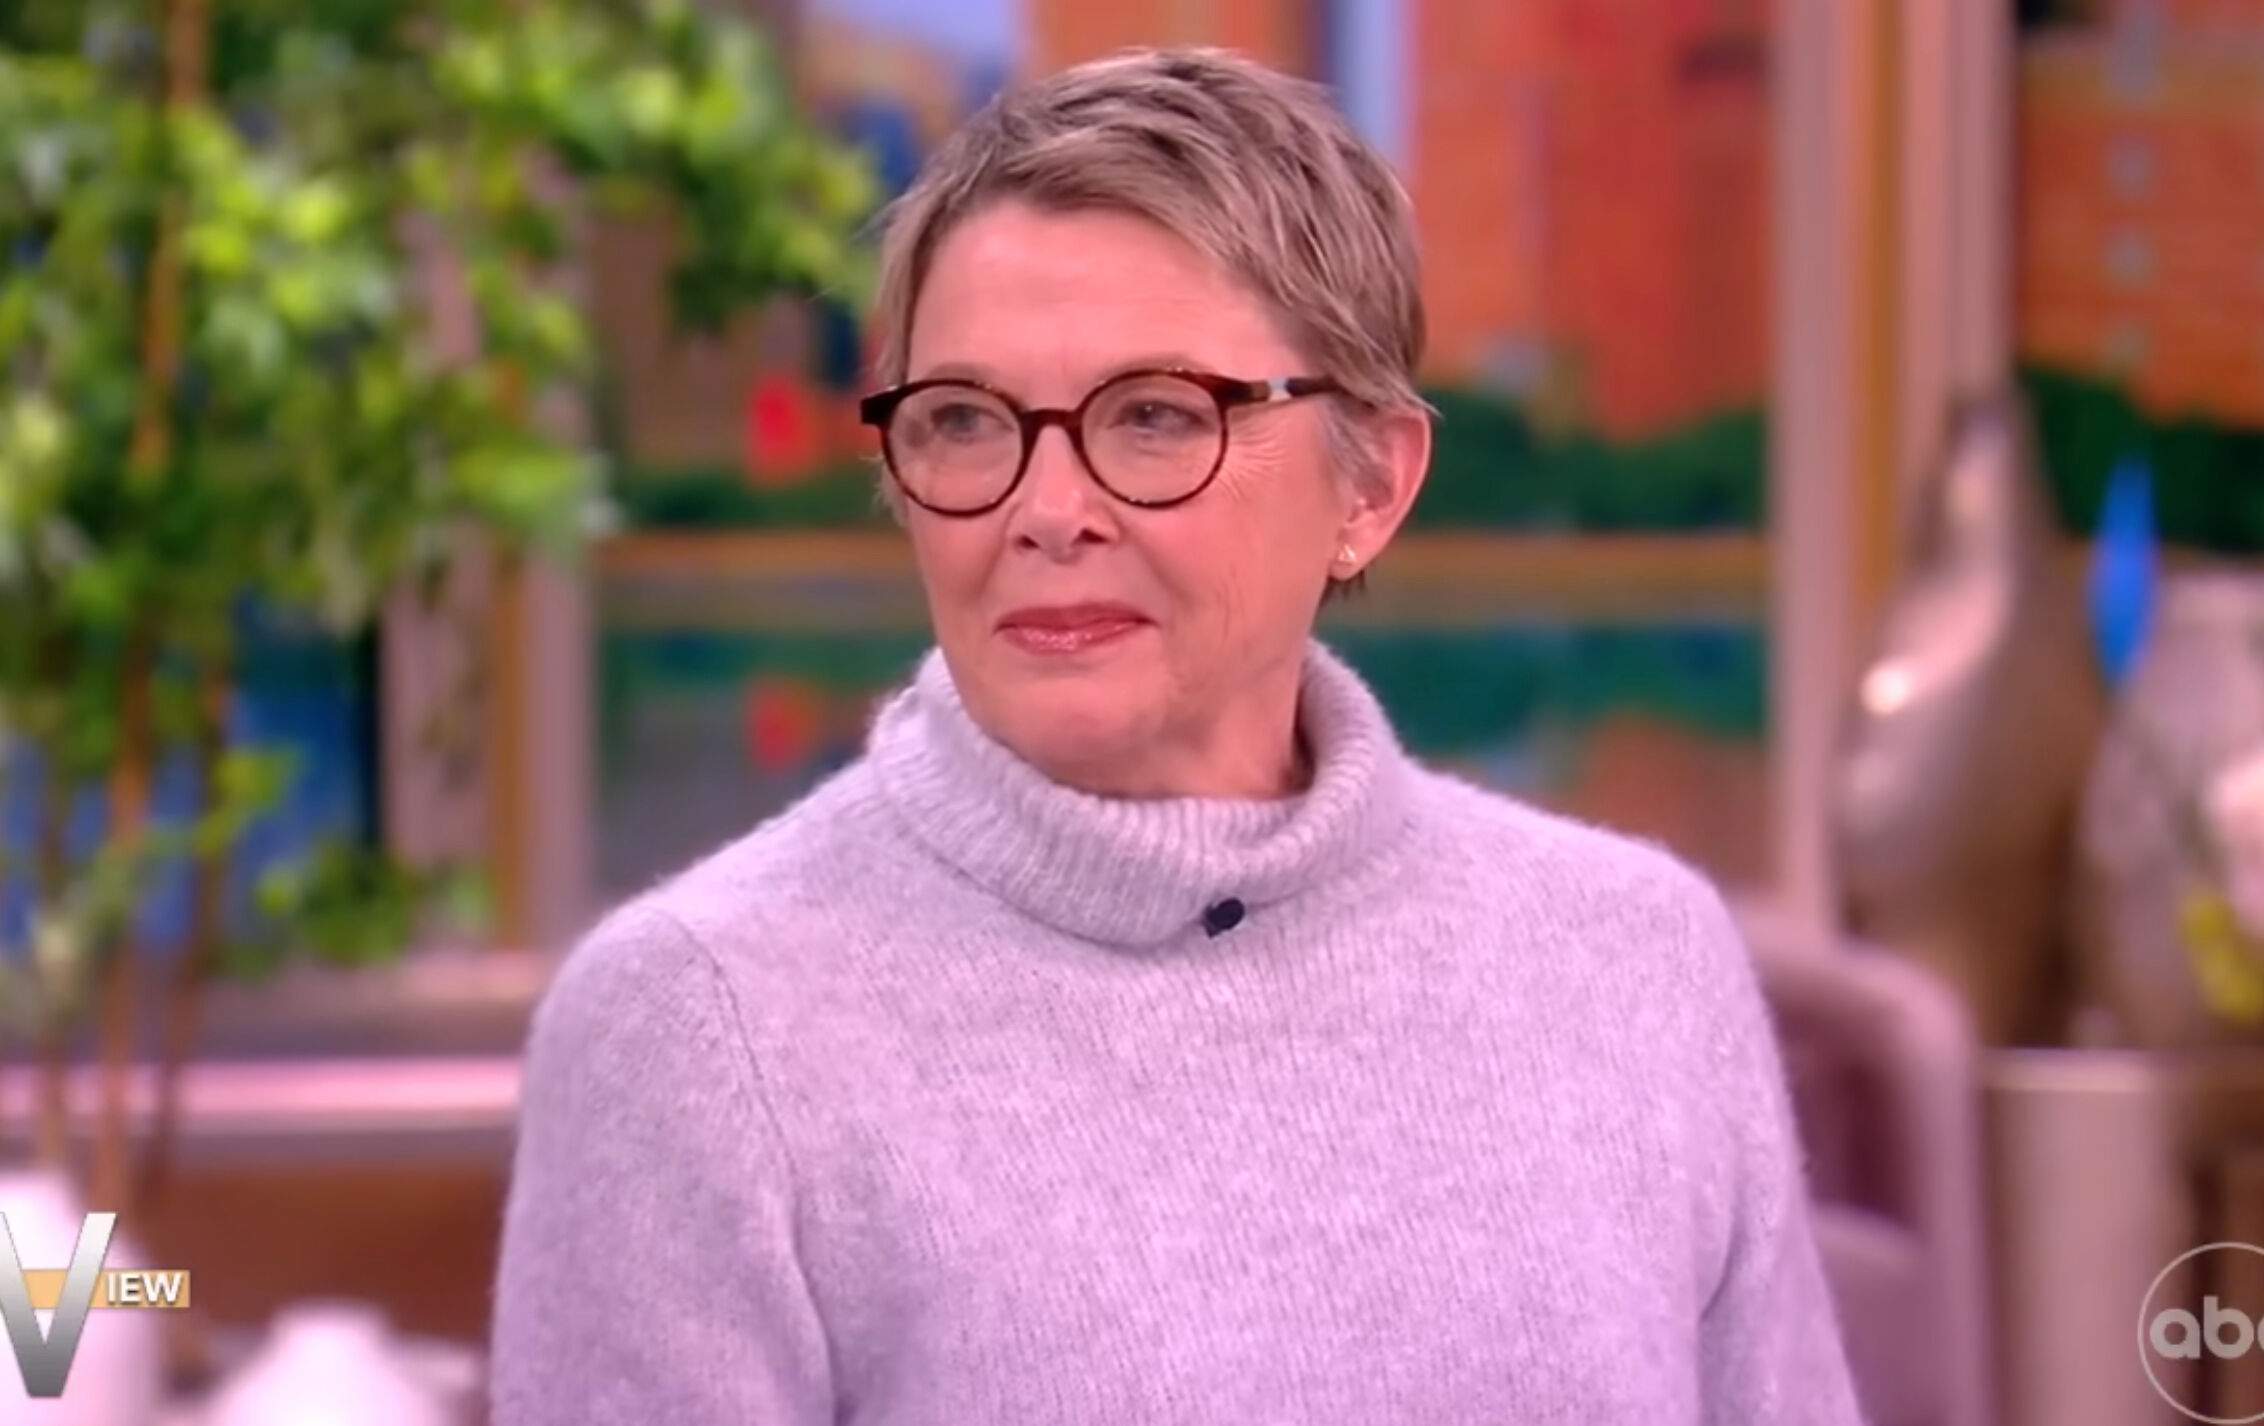 Annette Bening on the January 12 episode of The View